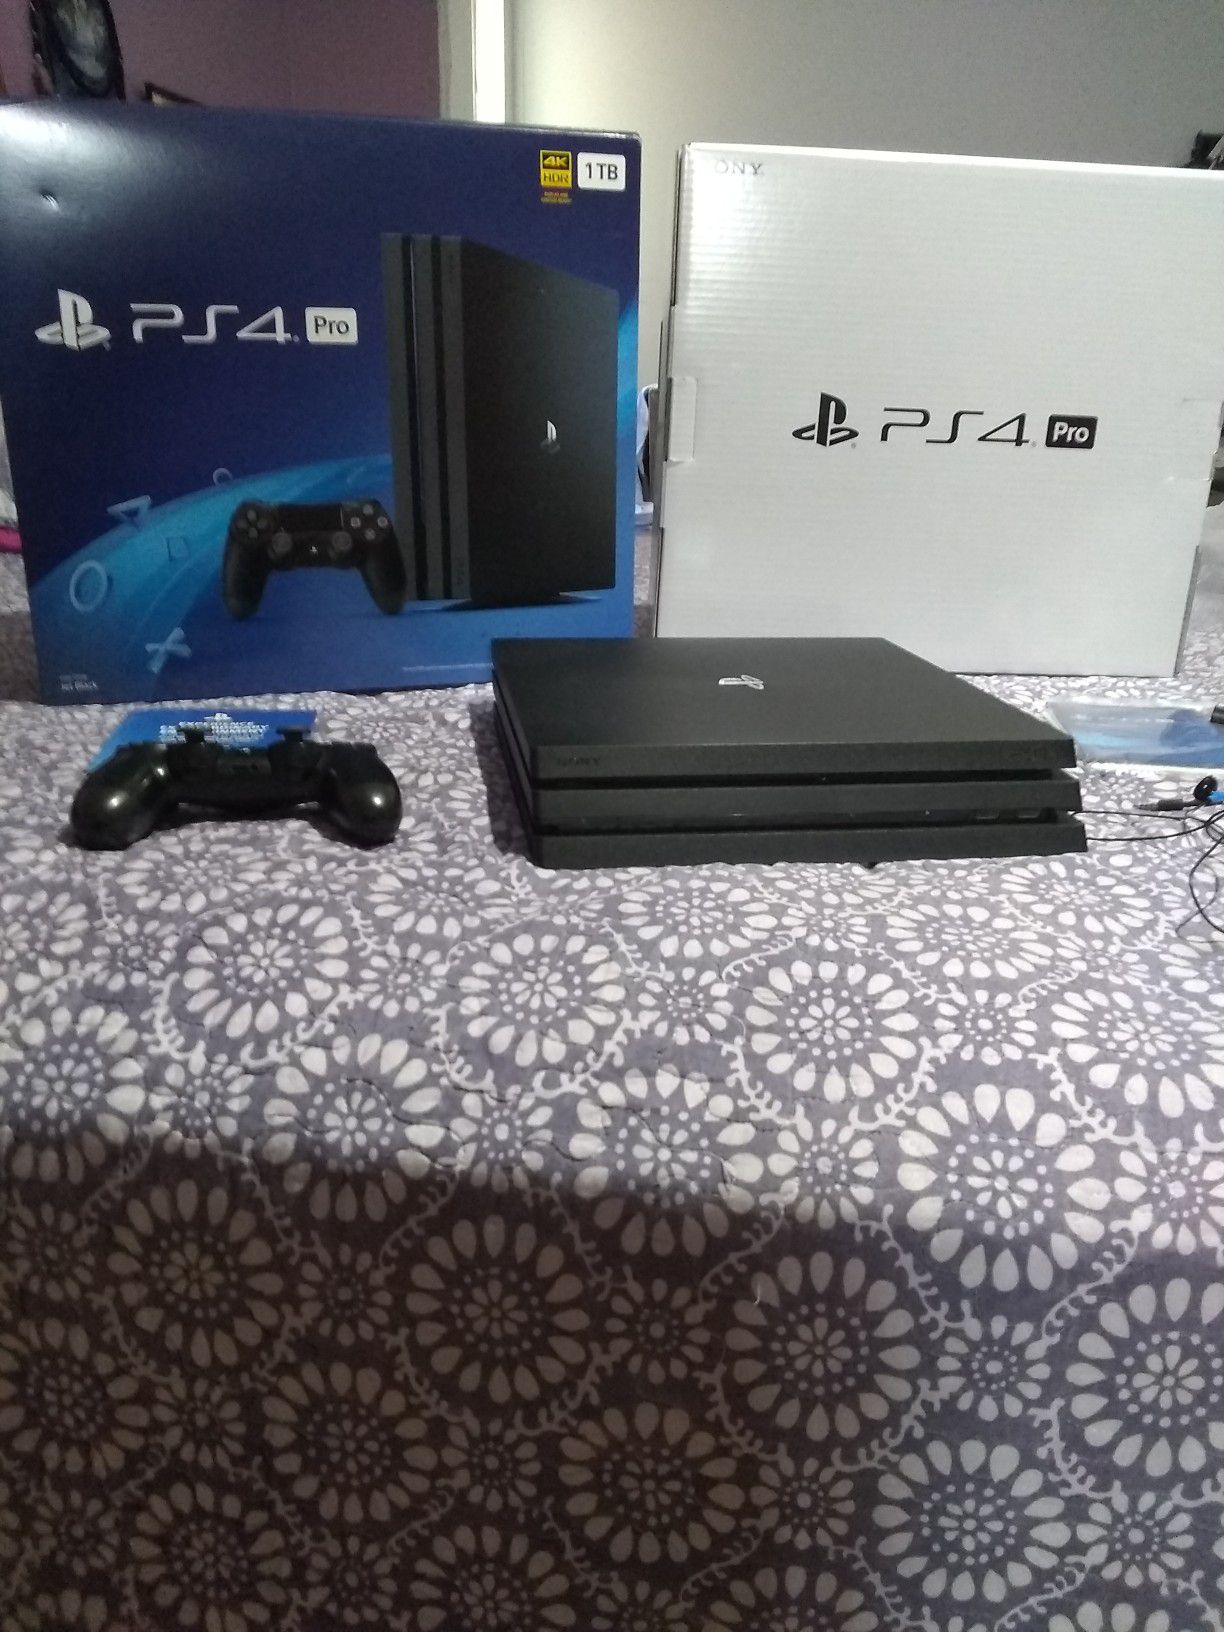 PS4 PRO AND MINECRAFT GAME